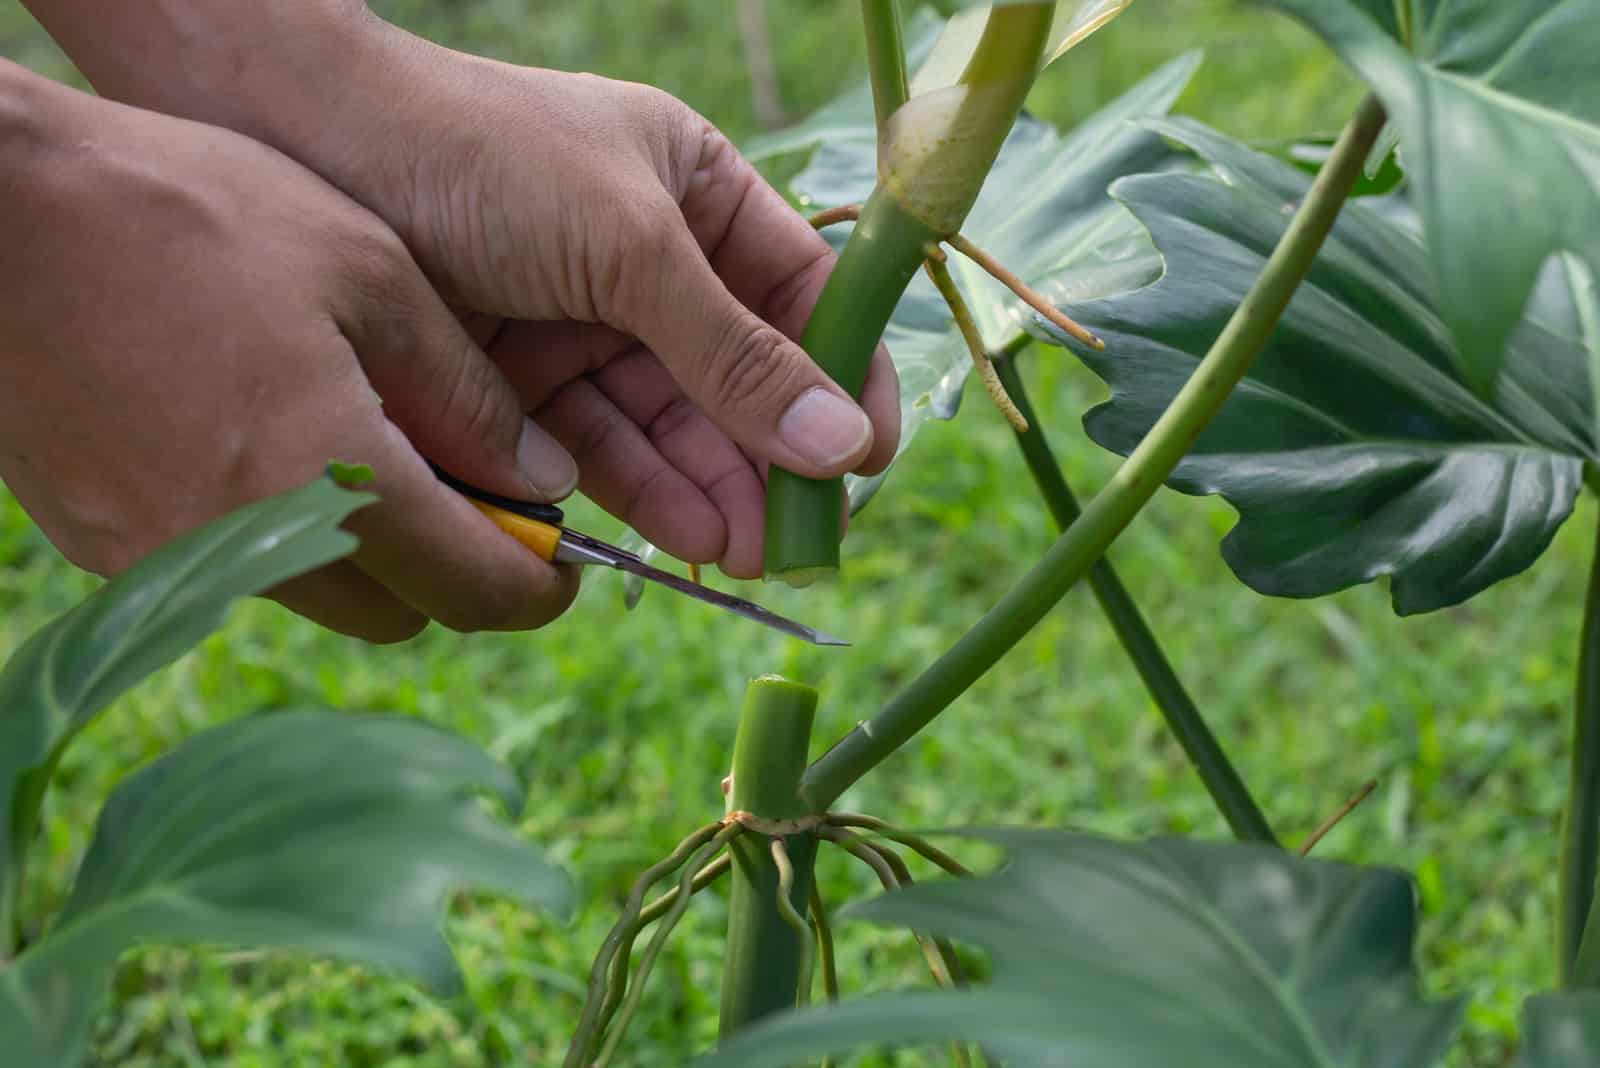 gardener holding a Philodendron plant to propagate as a new plant